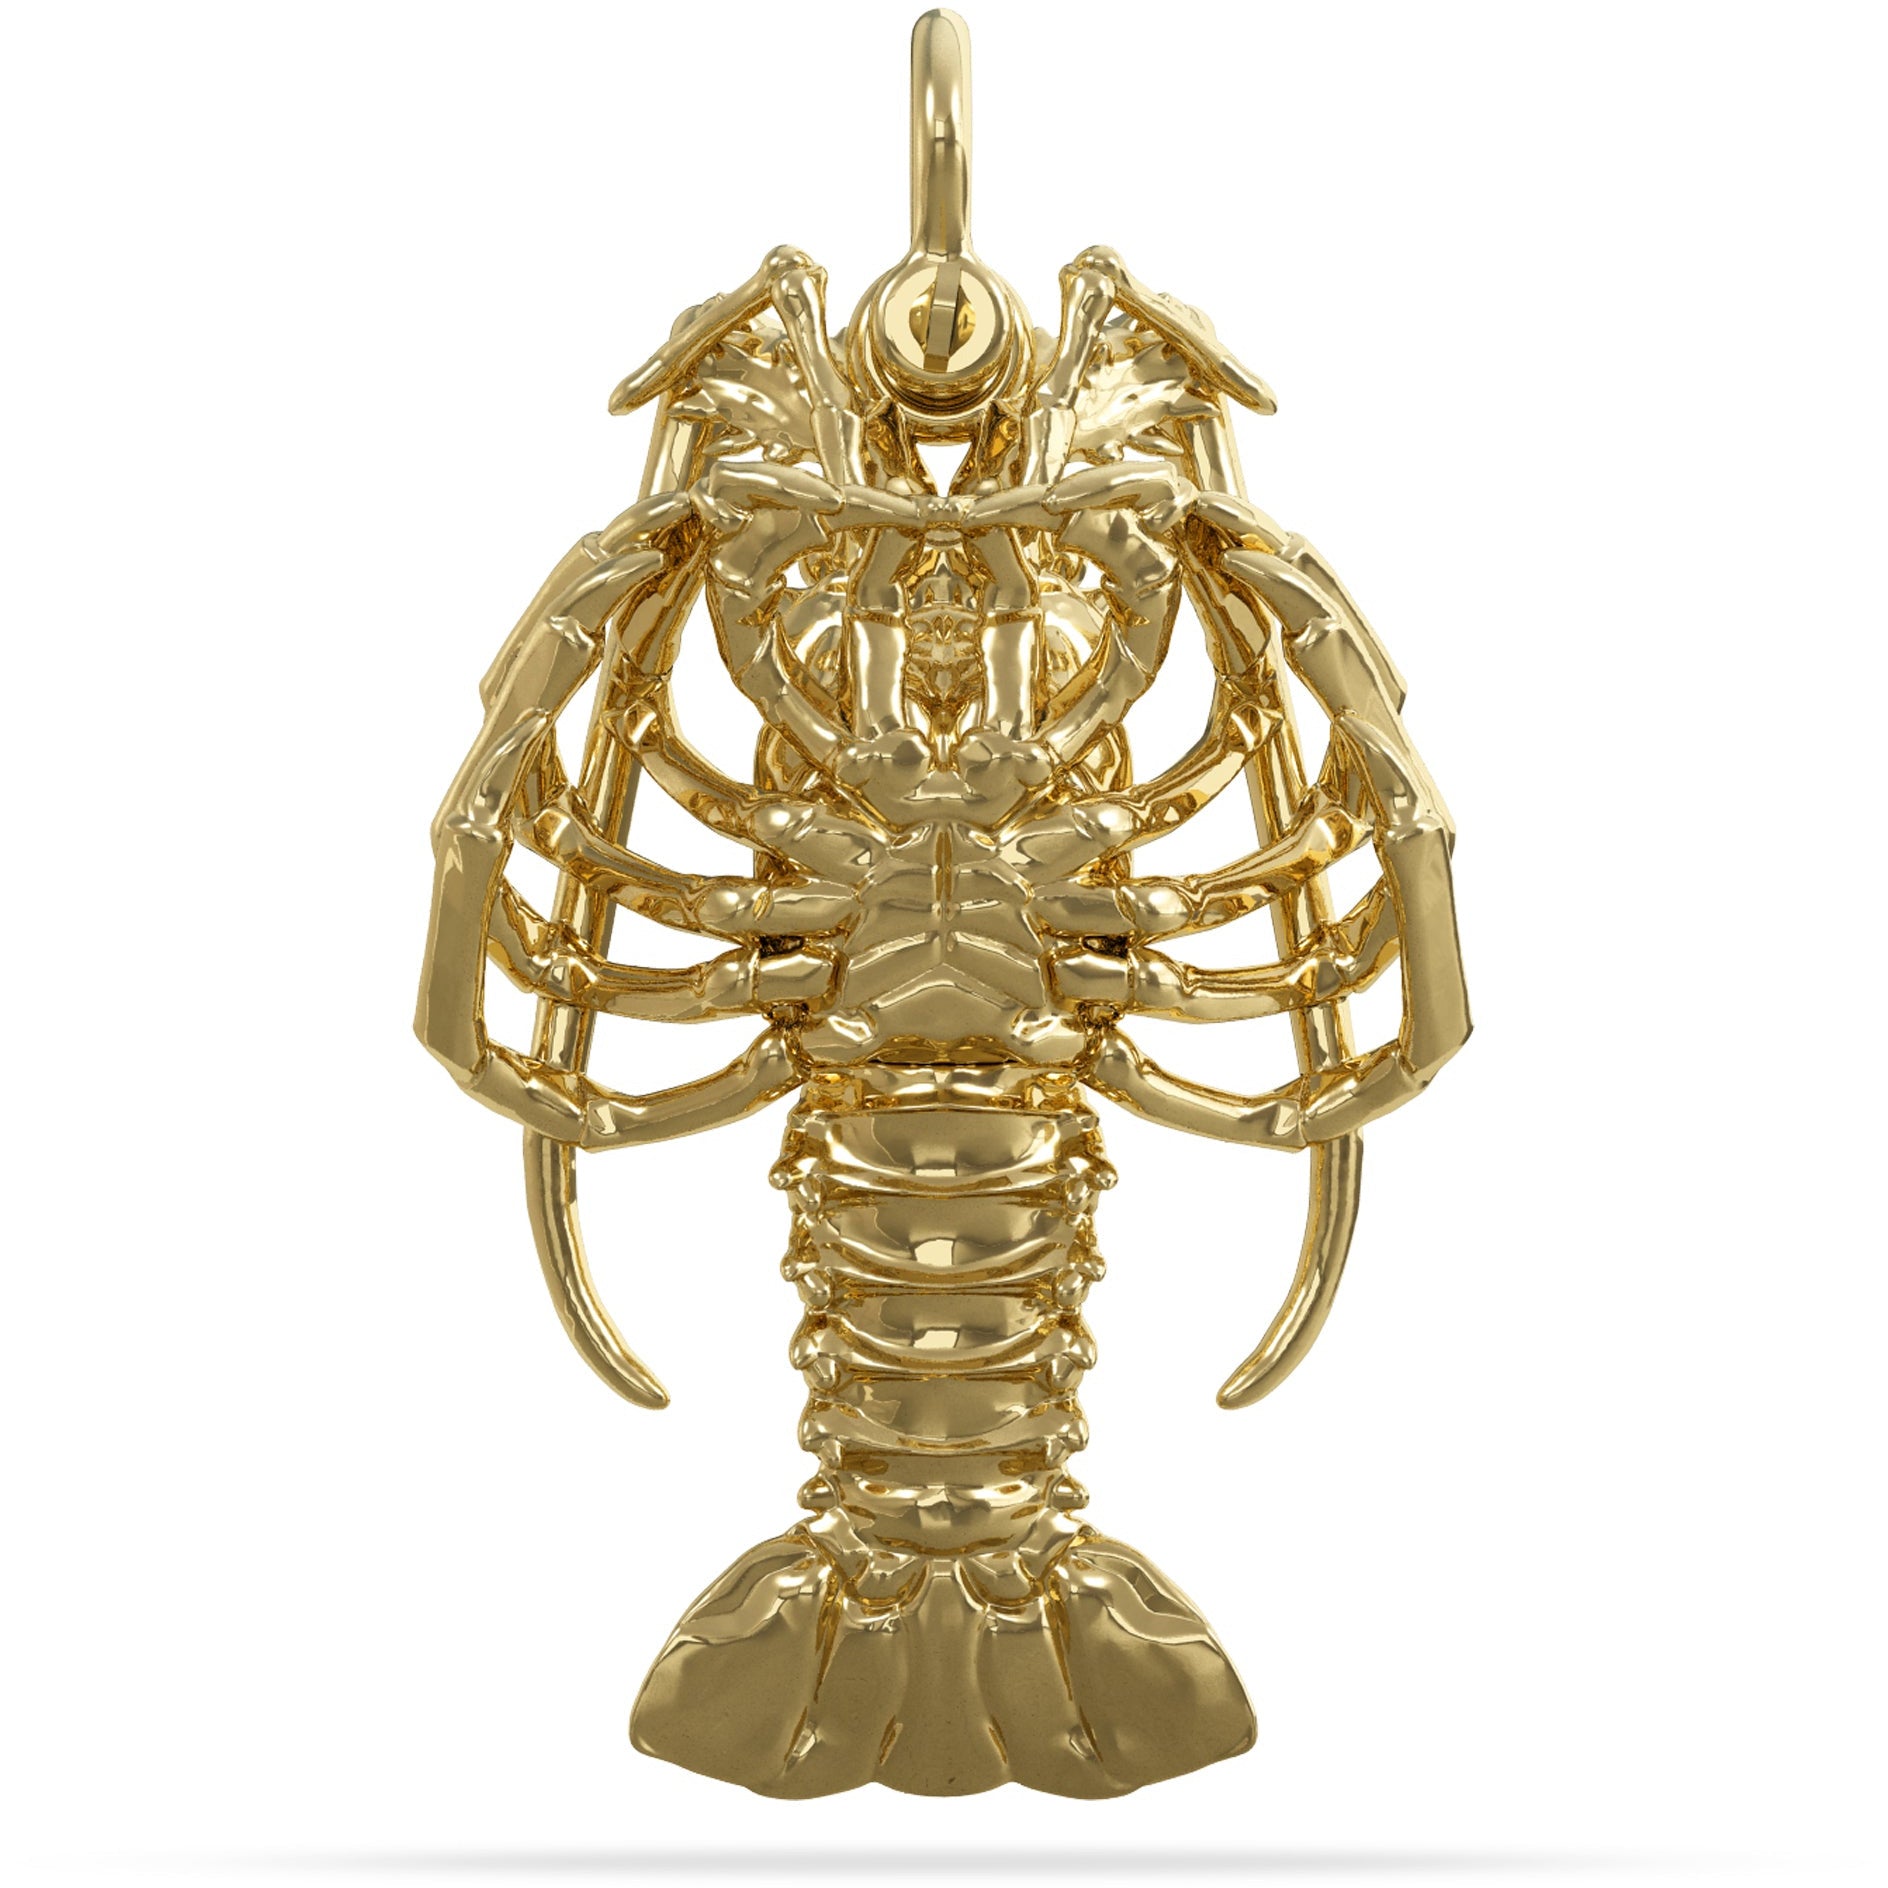 The Underside or Reverse side of Solid 14k Spiny Florida Lobster Pendant High Polished Mirror Finish With tail Straight Hung on A Mariner Shackle Bail Custom Designed By Nautical Treasure Jewelry In The Florida Keys Islamorada for 2022 Mini Season